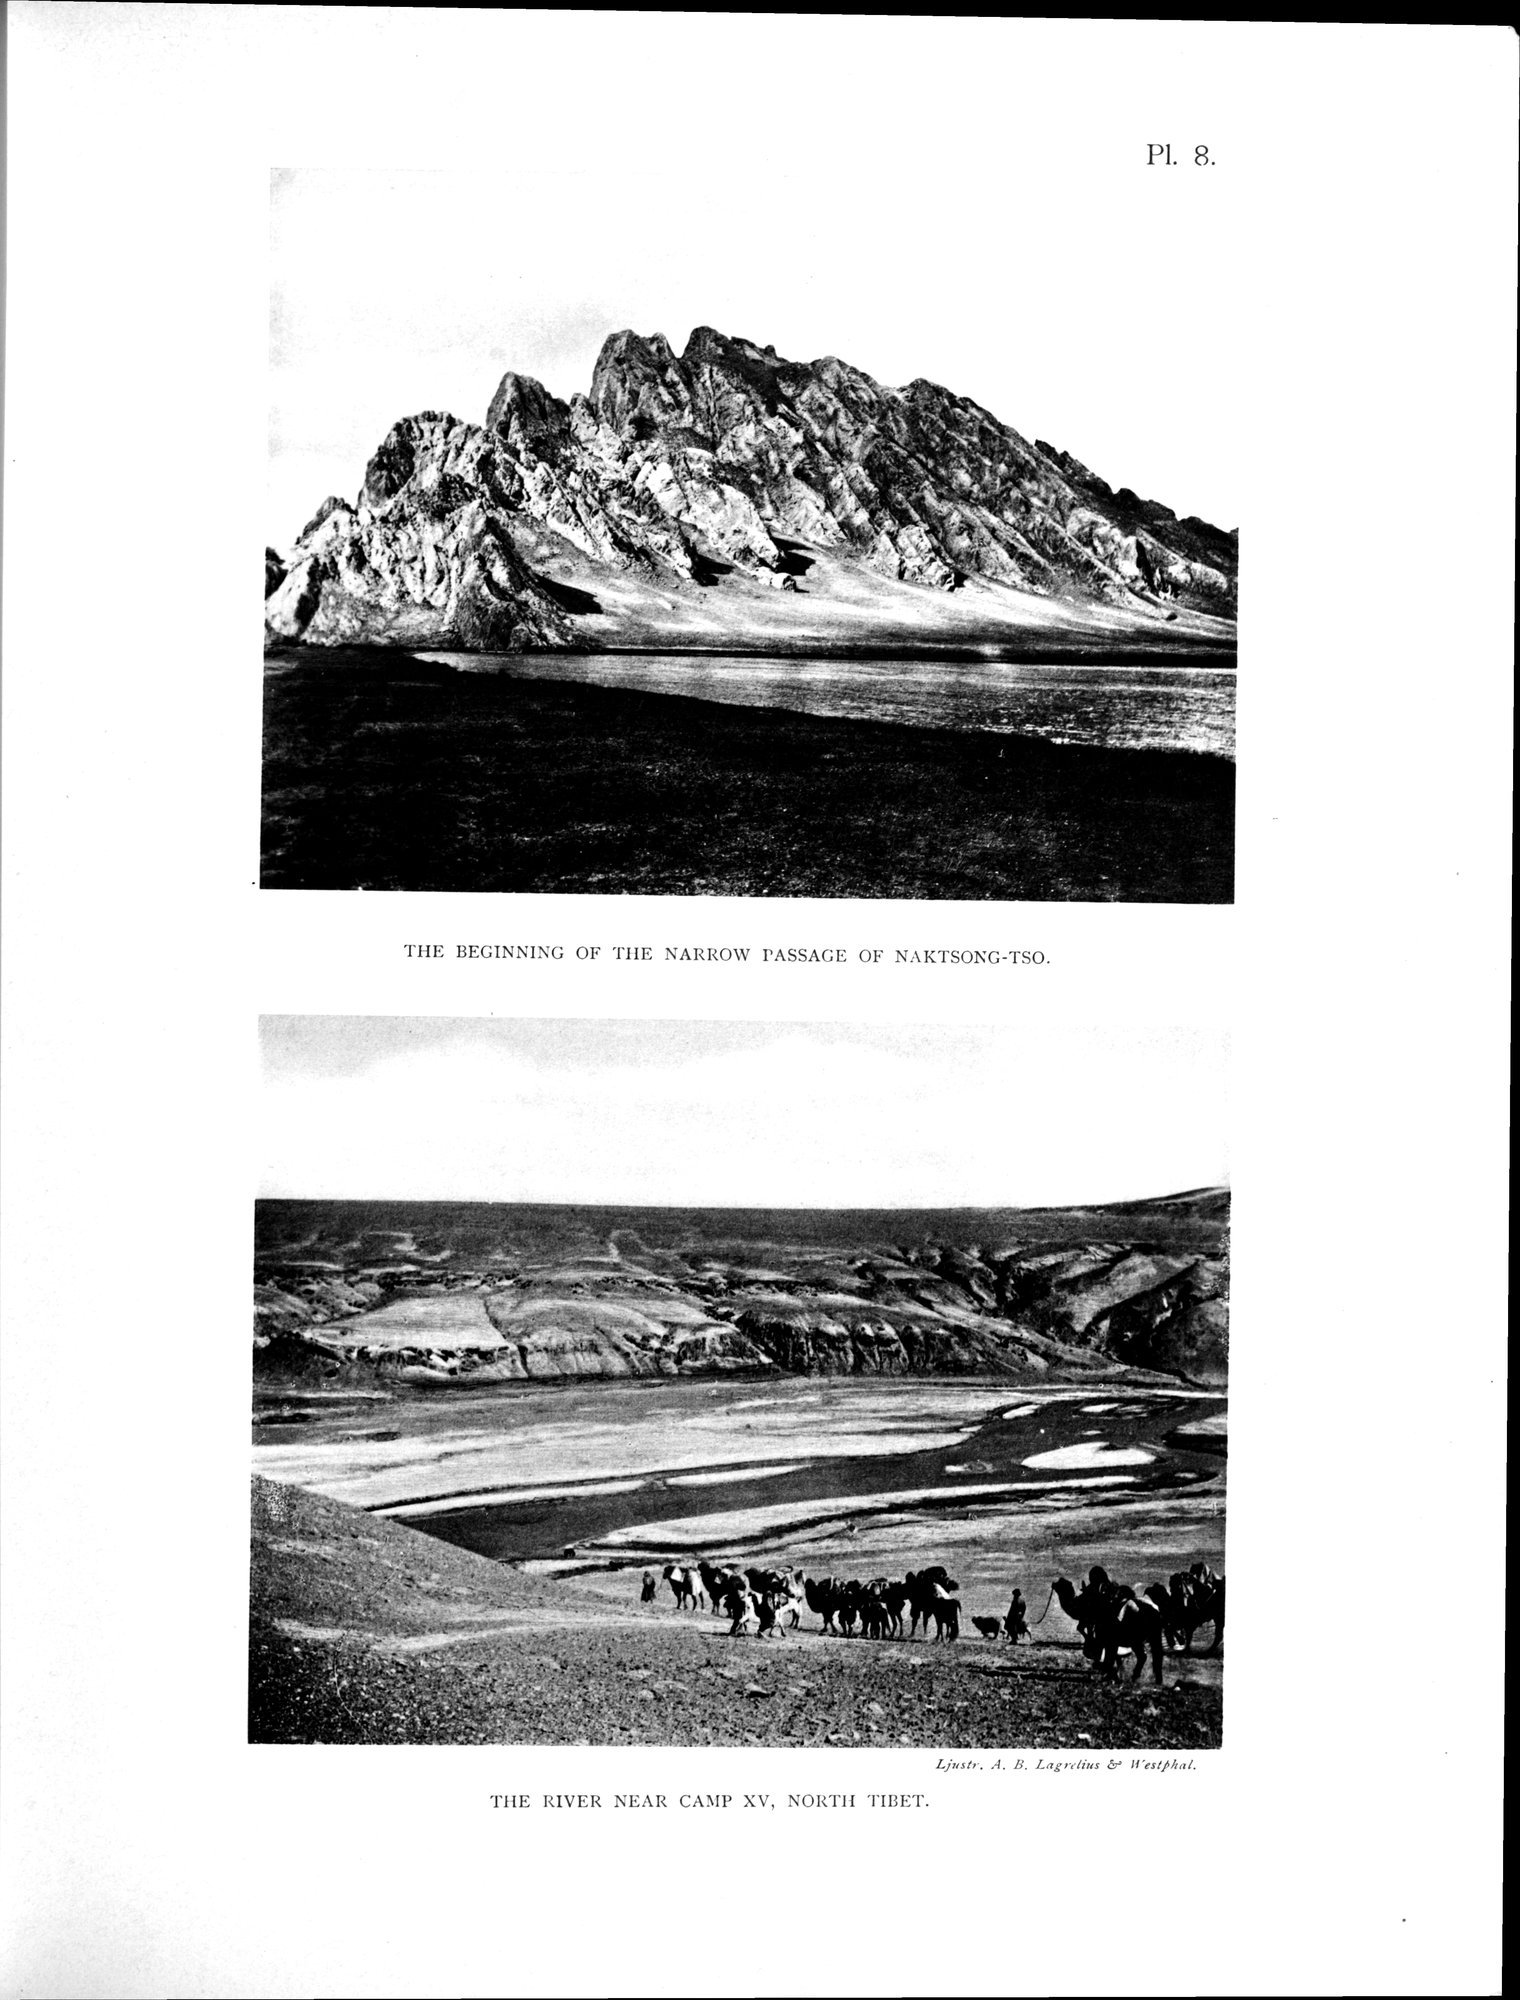 Scientific Results of a Journey in Central Asia, 1899-1902 : vol.4 / 87 ページ（白黒高解像度画像）